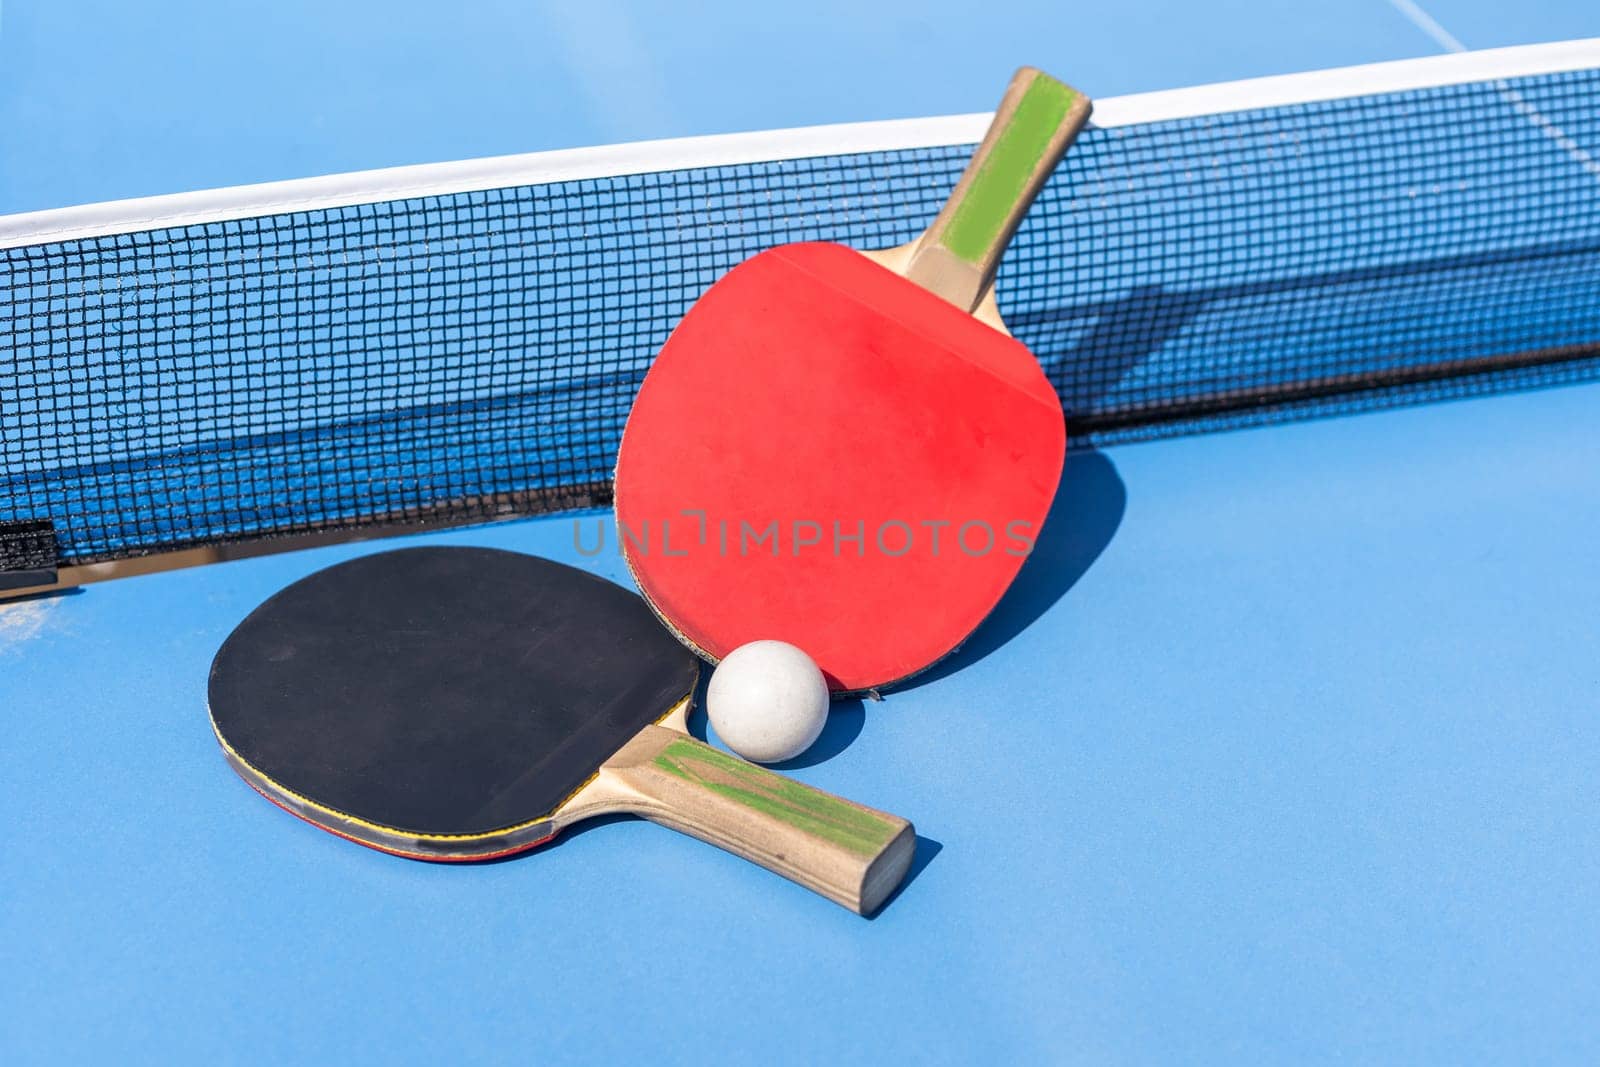 Two table tennis or ping pong rackets and ball on blue table with net. High quality photo